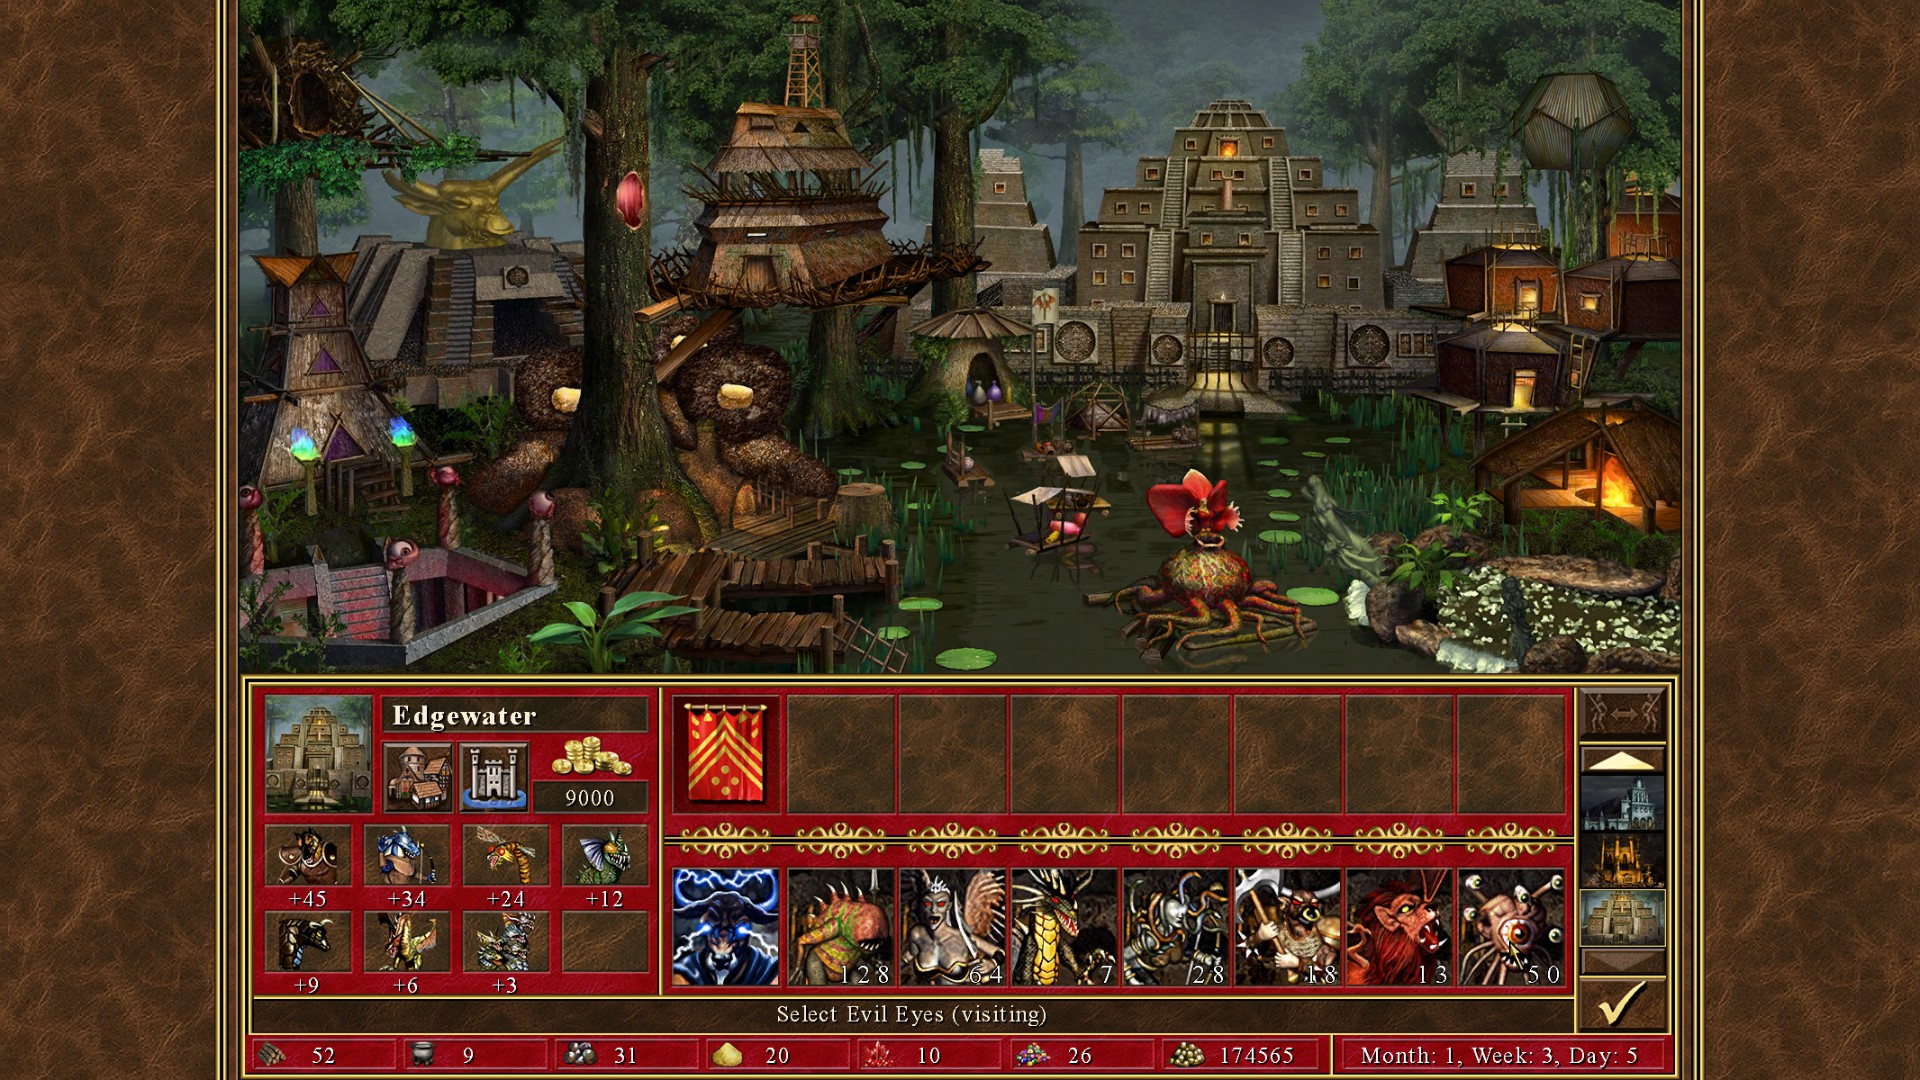 Find the best computers for Heroes of Might & Magic III